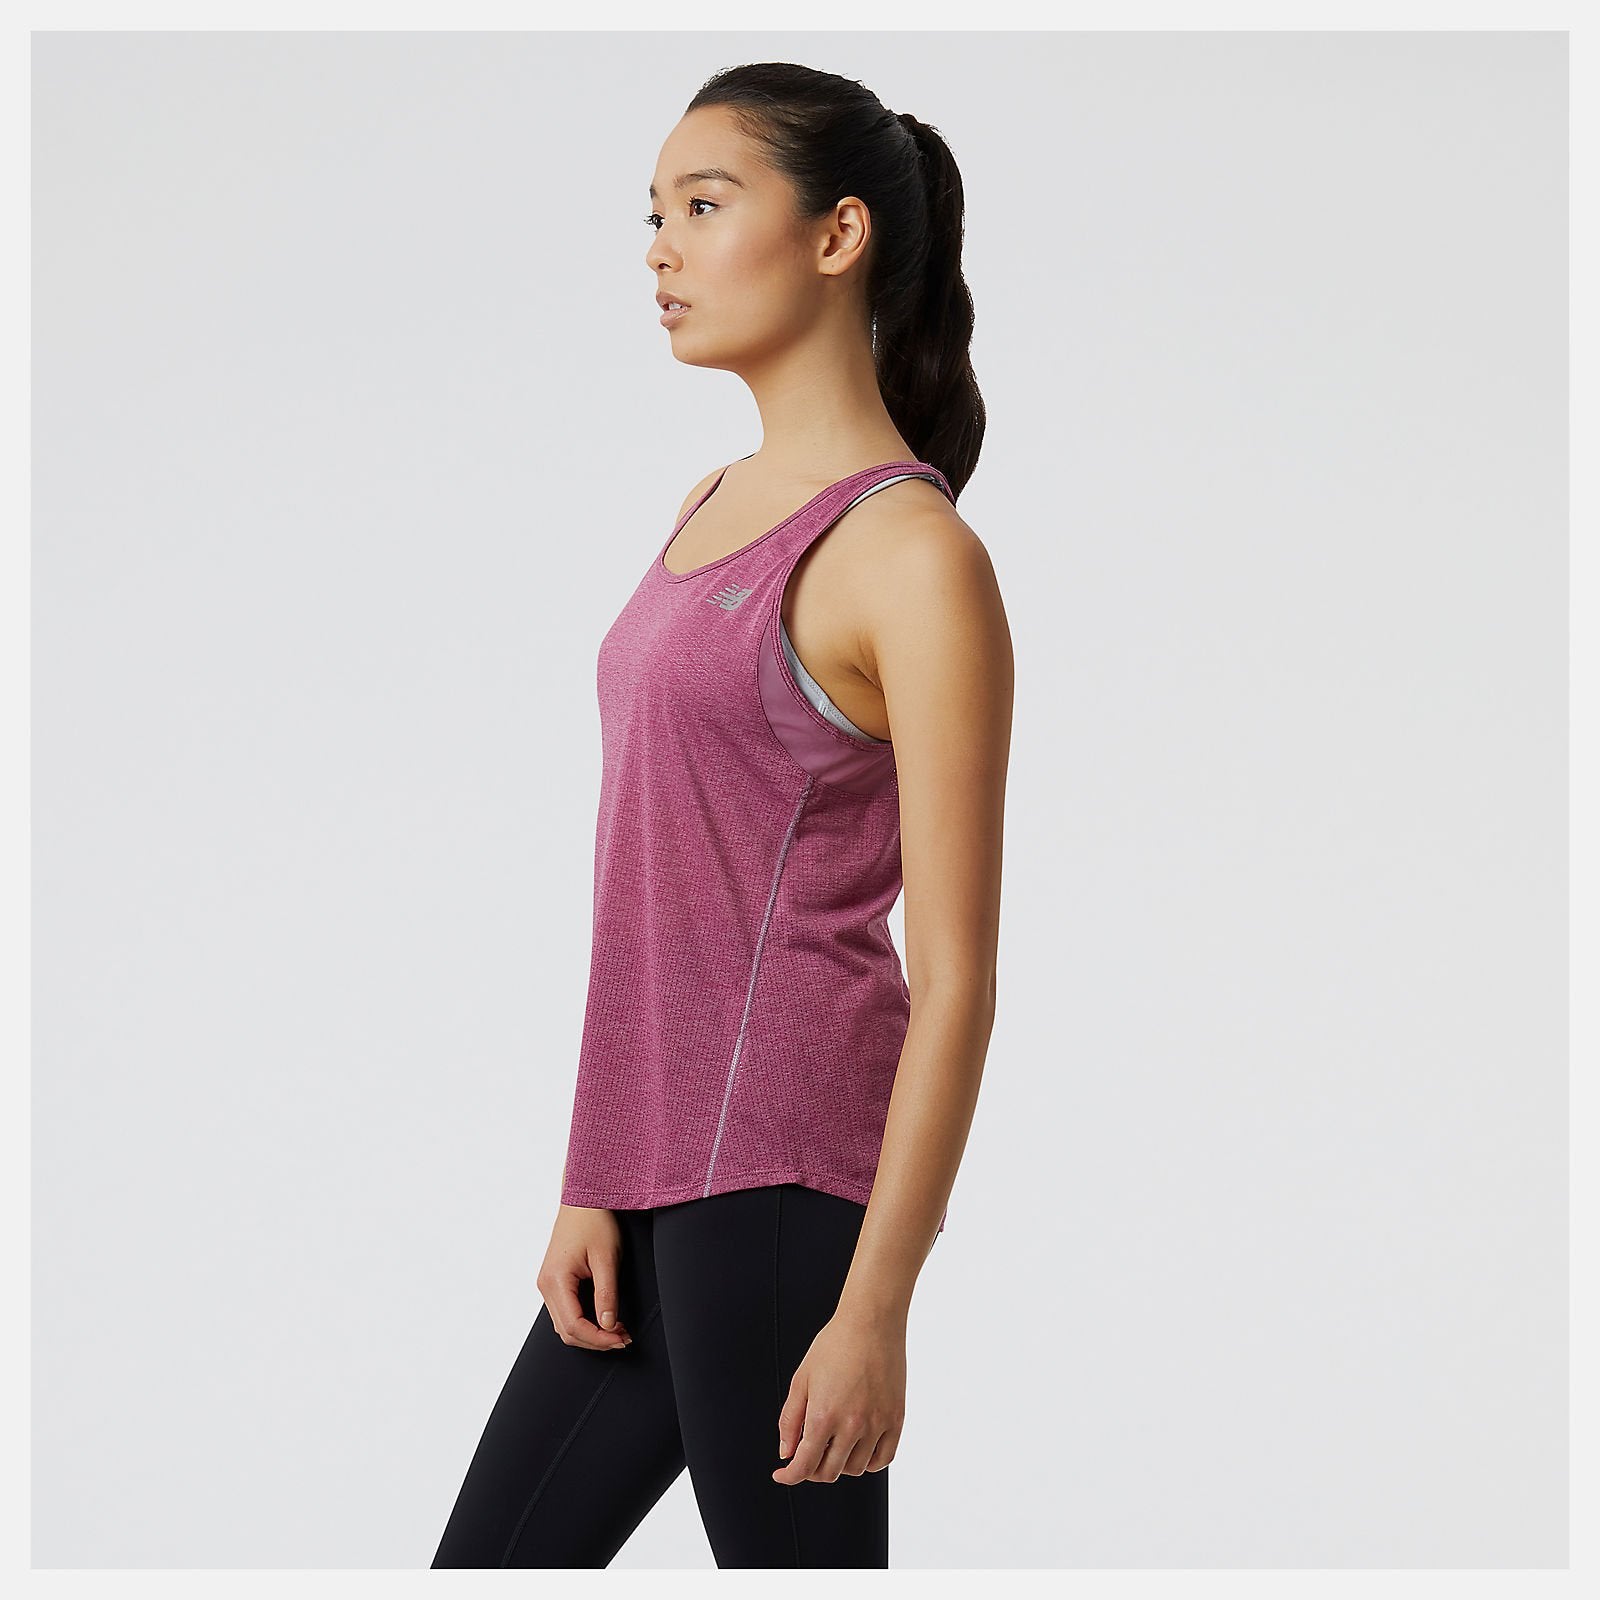 The Impact Run Tank was designed for impressive cooling and breathability throughout your run. This women's workout tank top features a lightweight mesh fabric with fast-drying NB ICEx technology to help you feel cool and comfortable. Plus, reflective branding and piping adds a stylish touch.